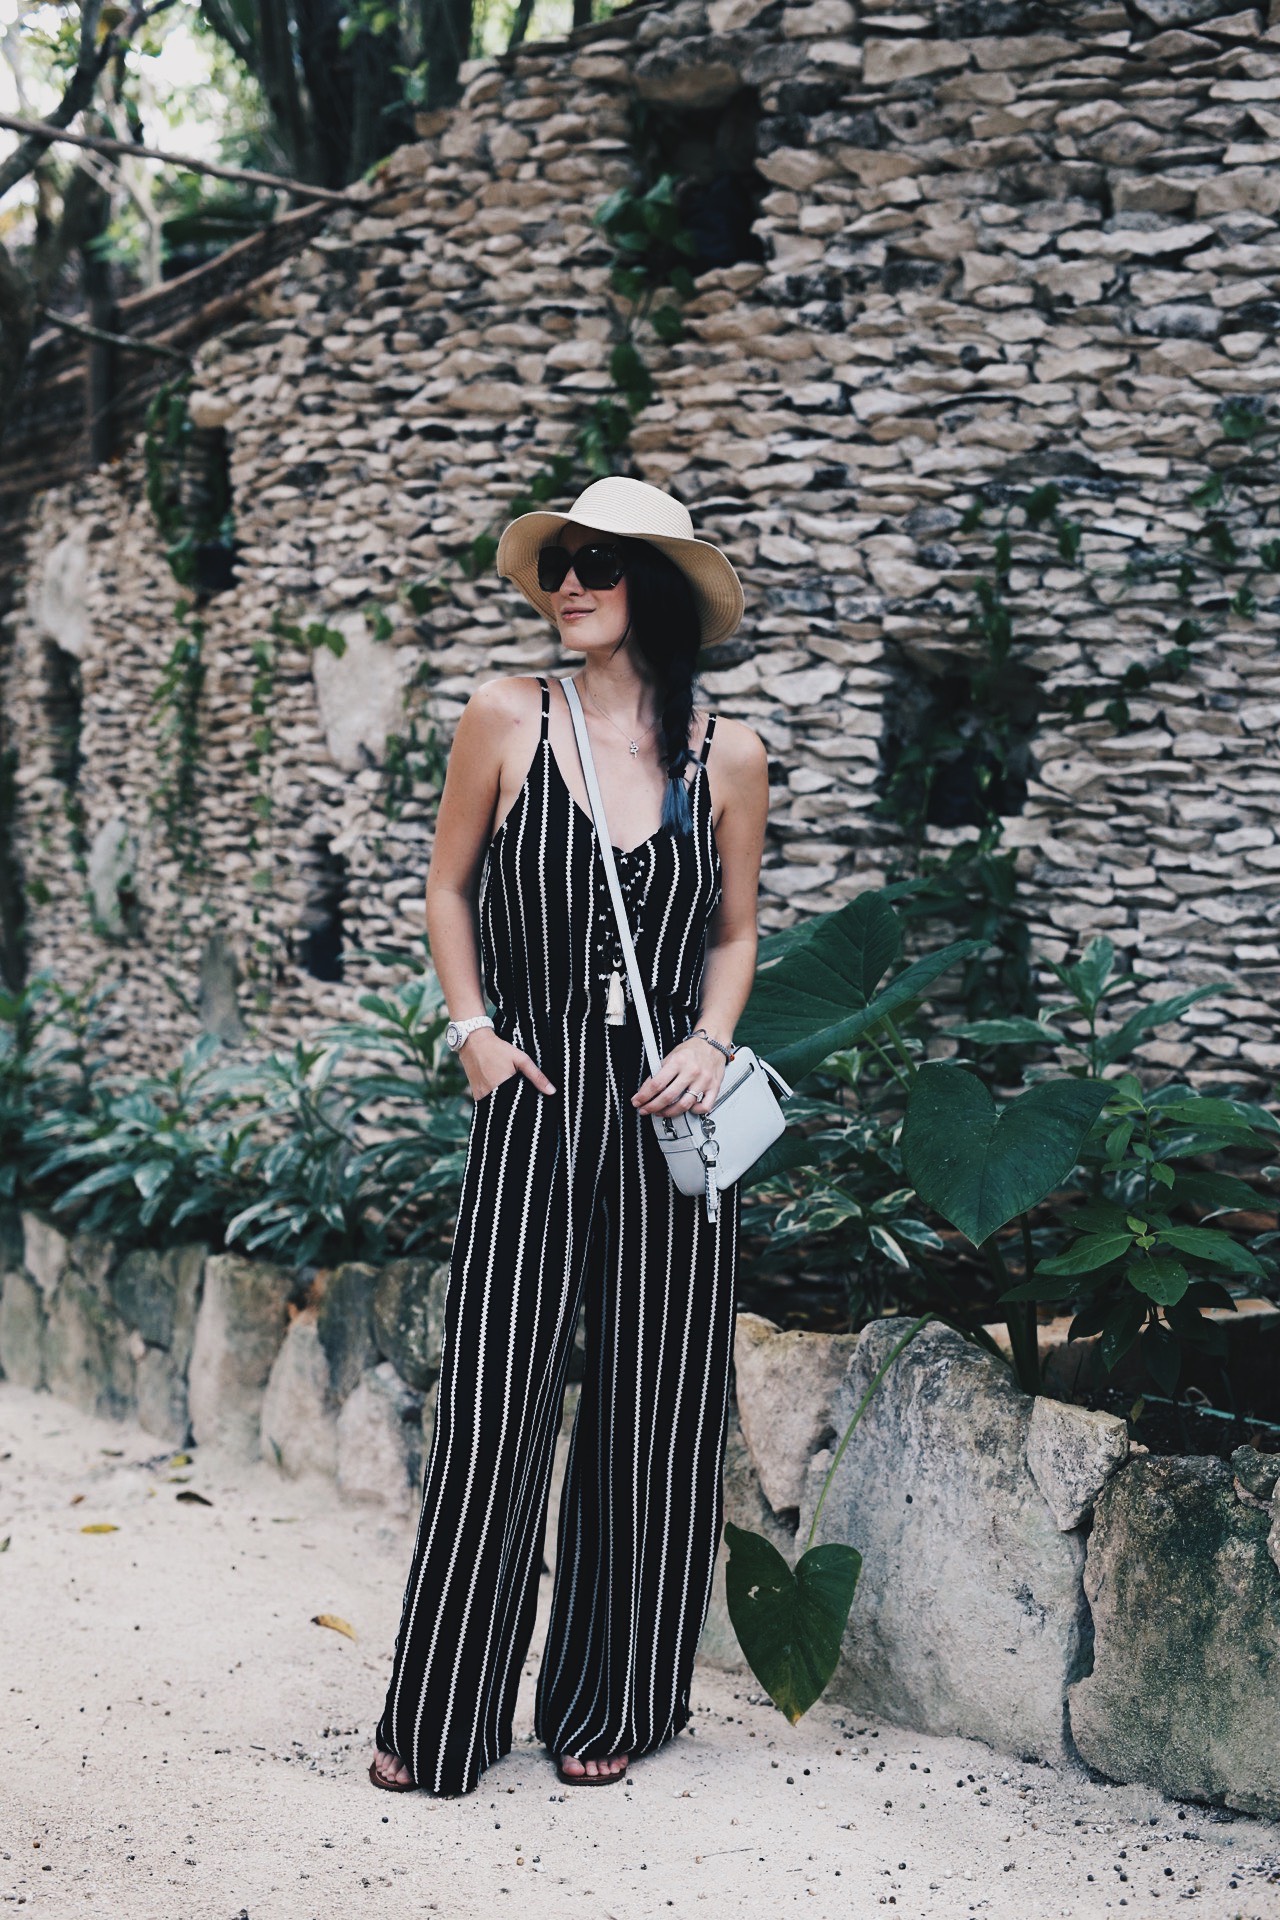 DTKAustin shares some of her recent photos from Tulum, Mexico with ideas on what to wear to beat the heat in the jungle or on the beach. Jumpsuit from Wala Swim, Bag from Henri Bendel. Click for more images and information. | how to style a jumpsuit | how to wear a jumpsuit | jumpsuit styling tips | summer fashion tips | summer outfit ideas | summer style tips | what to wear for summer | warm weather fashion | fashion for summer | style tips for summer | outfit ideas for summer || Dressed to Kill